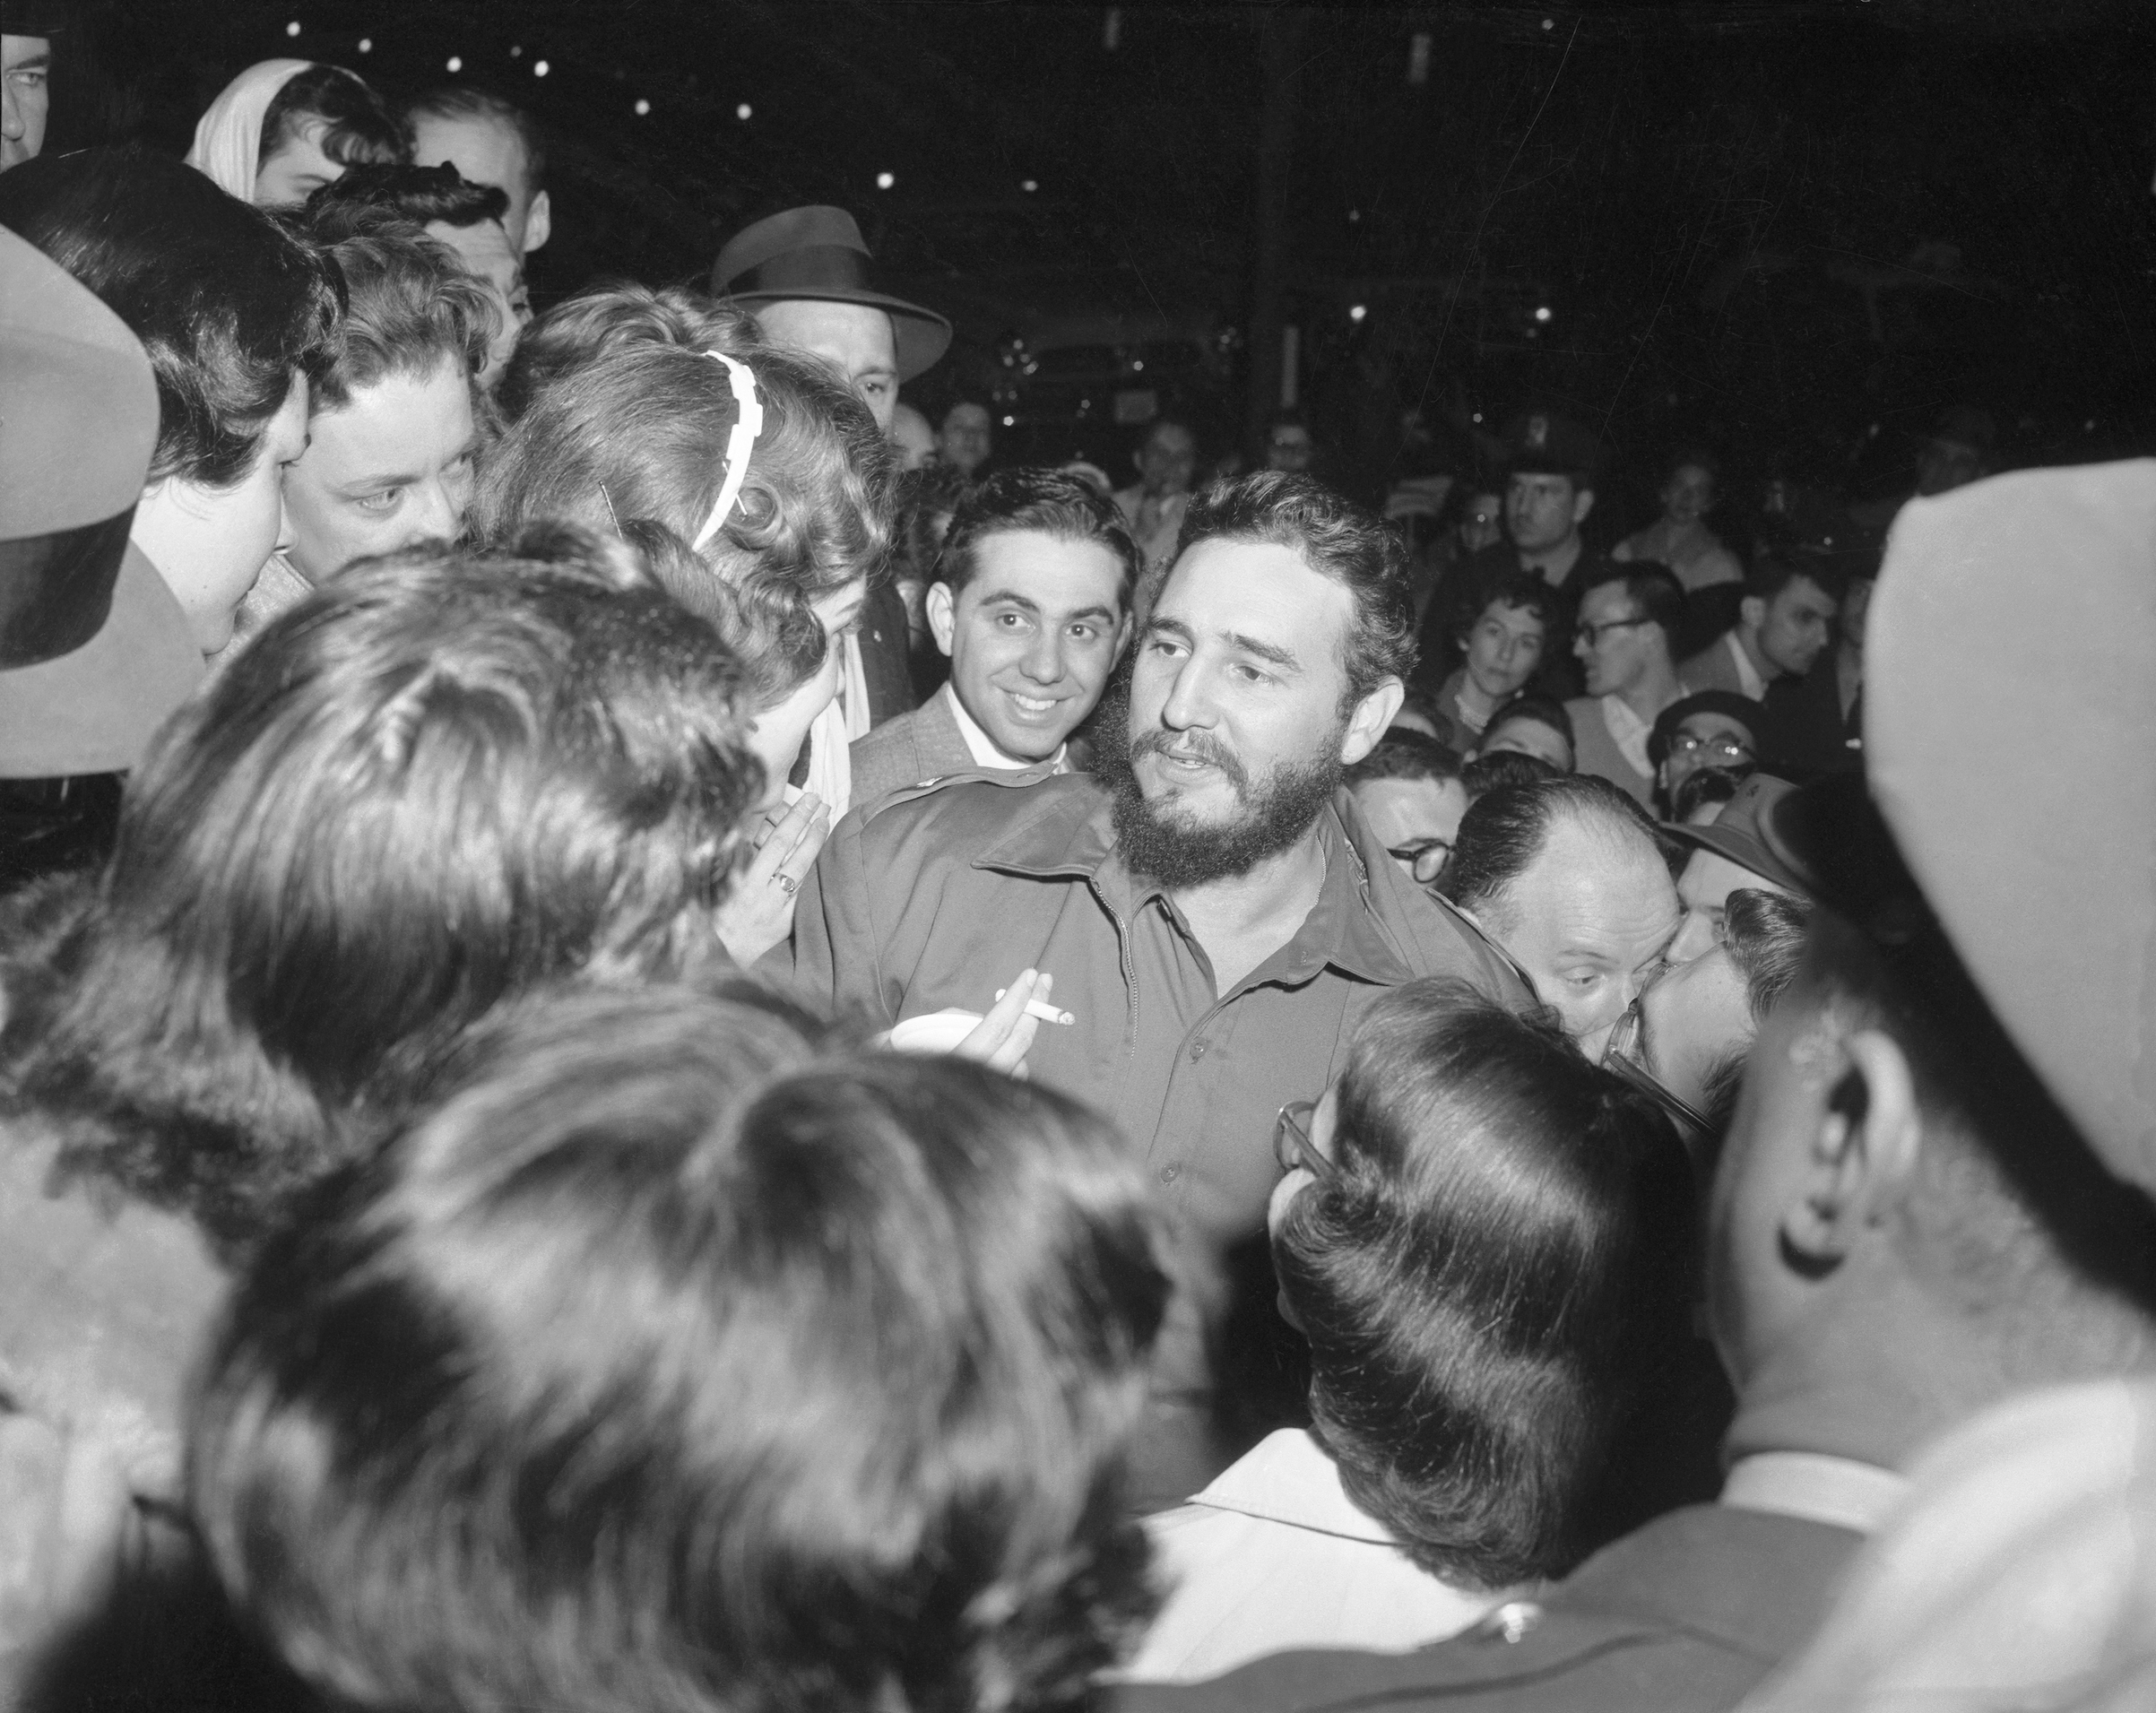 Cuban Prime Minister Fidel Castro greets admirers who waited for him across the street from the Cuban Embassy in Washington, D.C., in 1959. (Bettmann Archive/Getty Images)